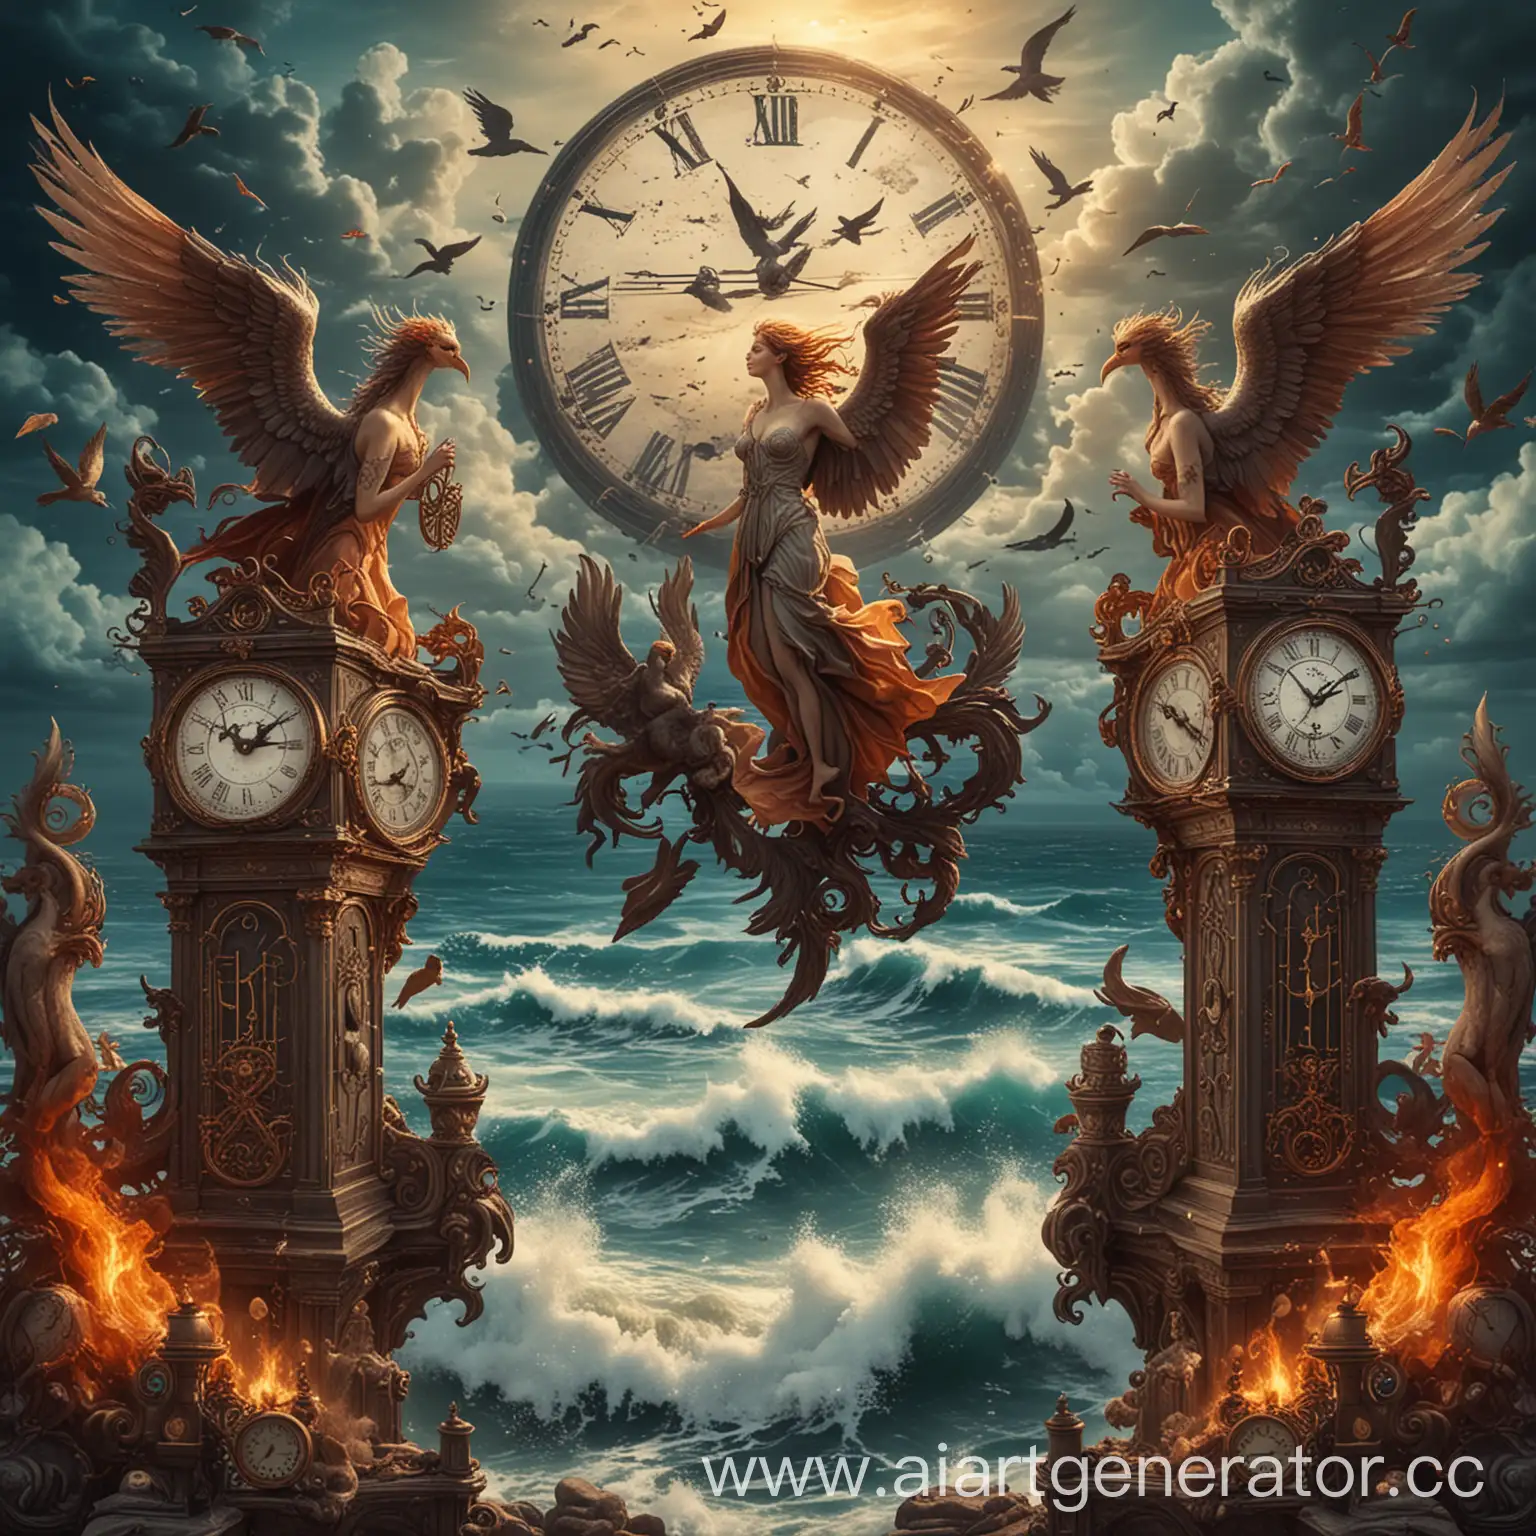 Celestial-Battle-Angels-and-Demons-with-Phoenix-Bird-and-Clocks-by-the-Sea